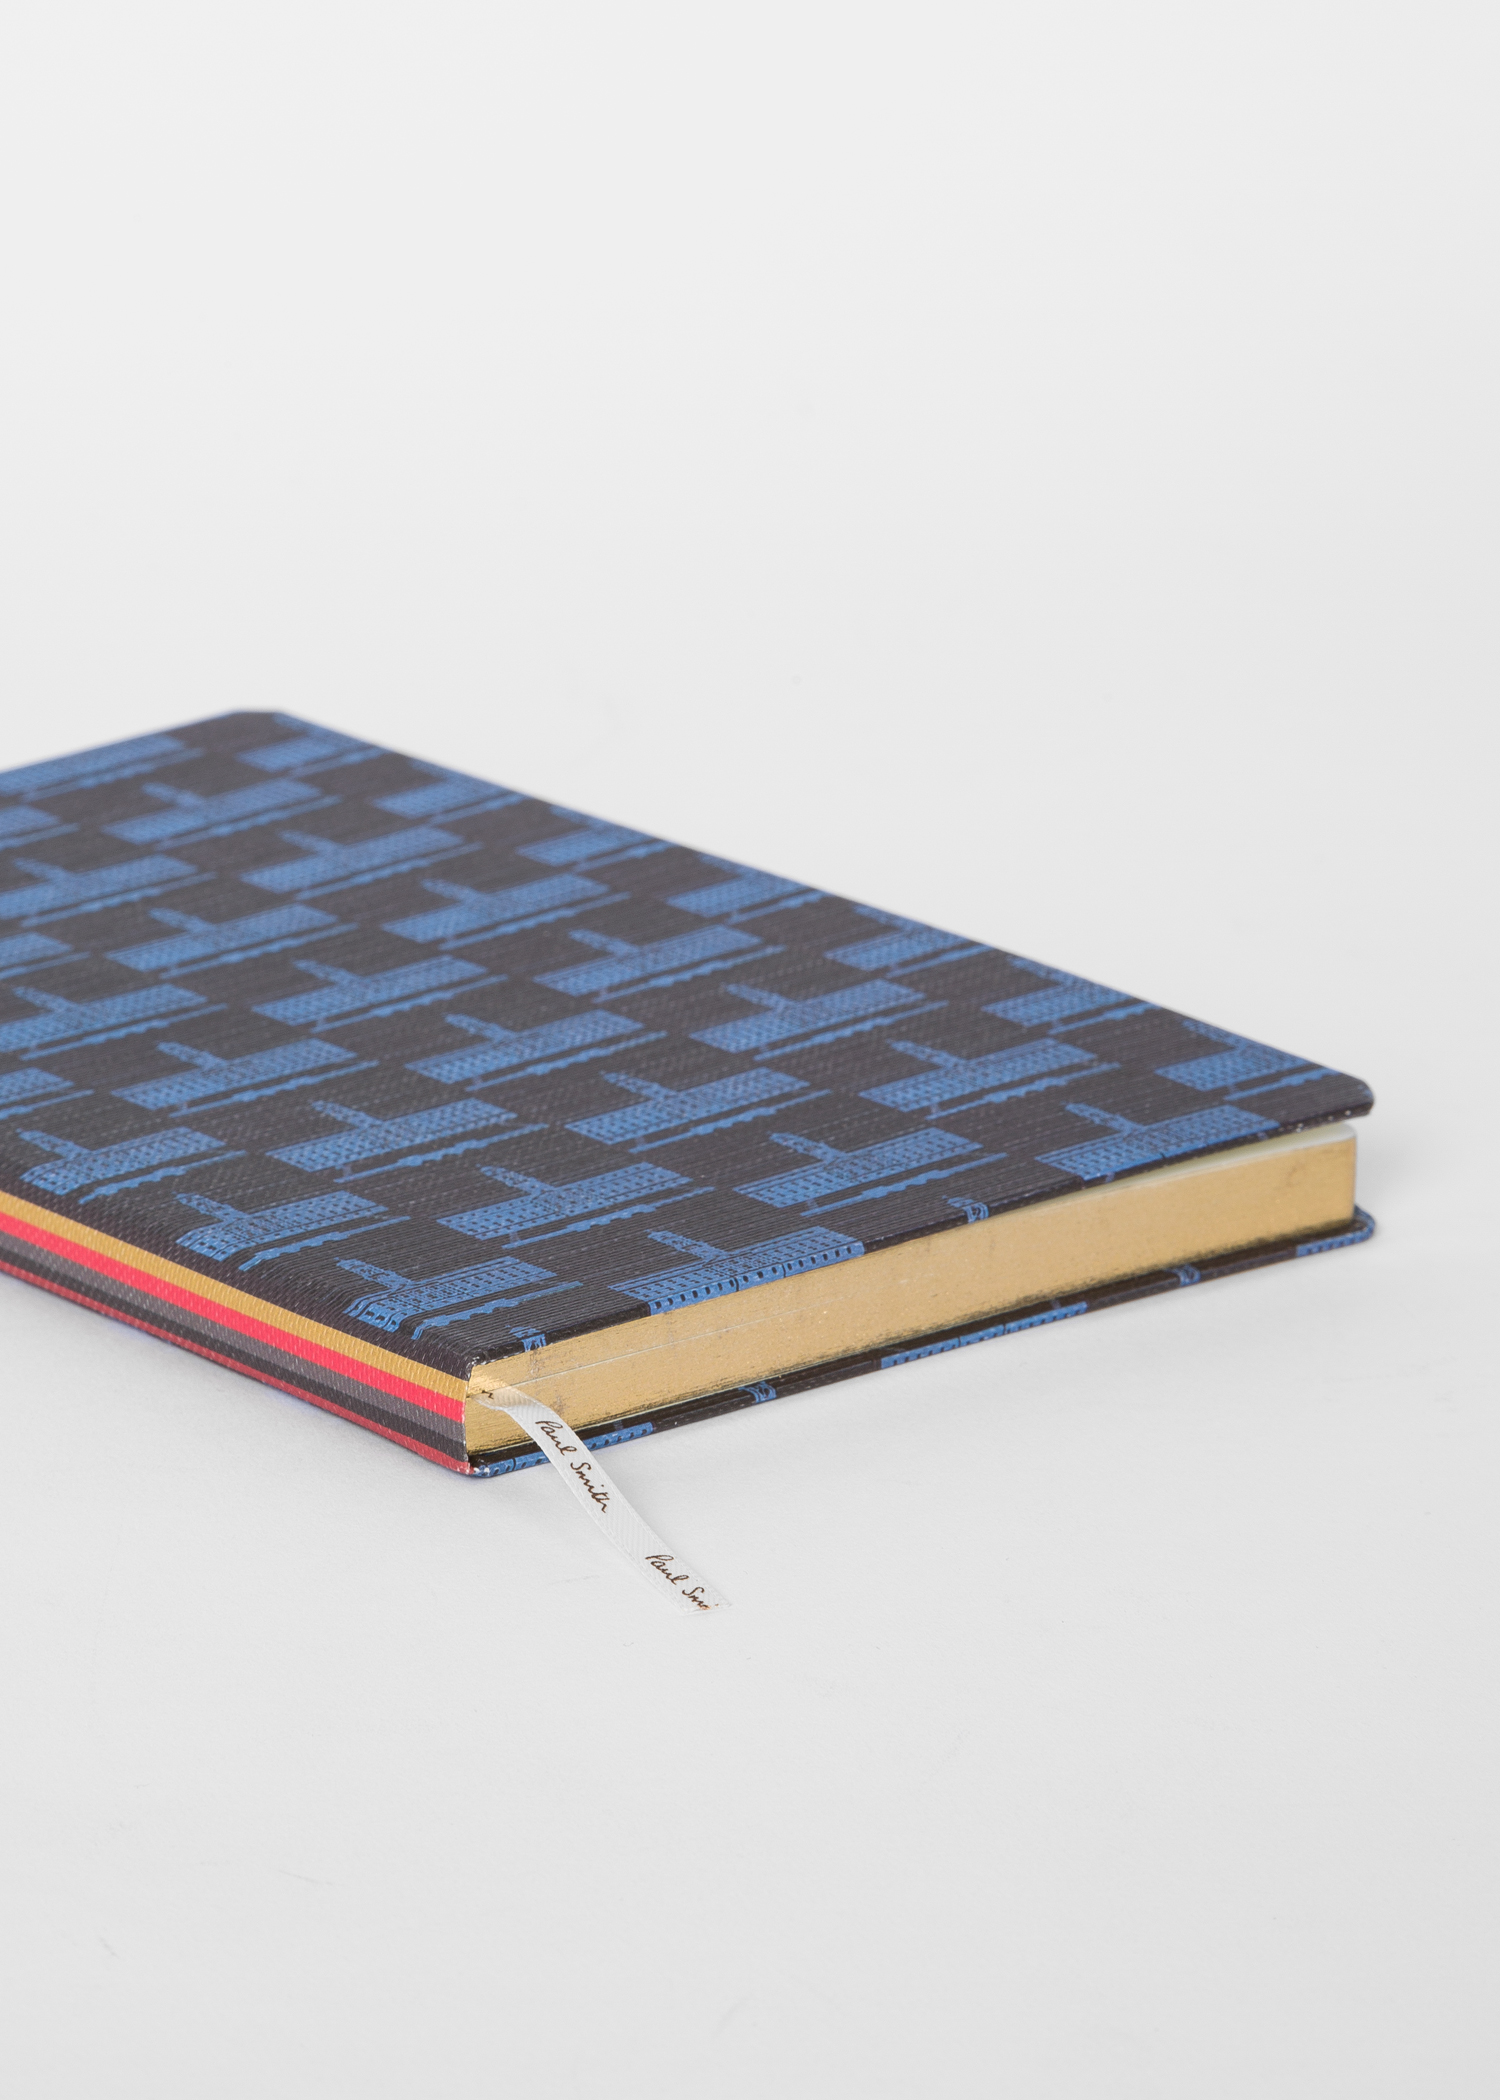 Detail view - Paul Smith For University Of Nottingham - Navy 'Trent Building' Print Notebook Paul Smith